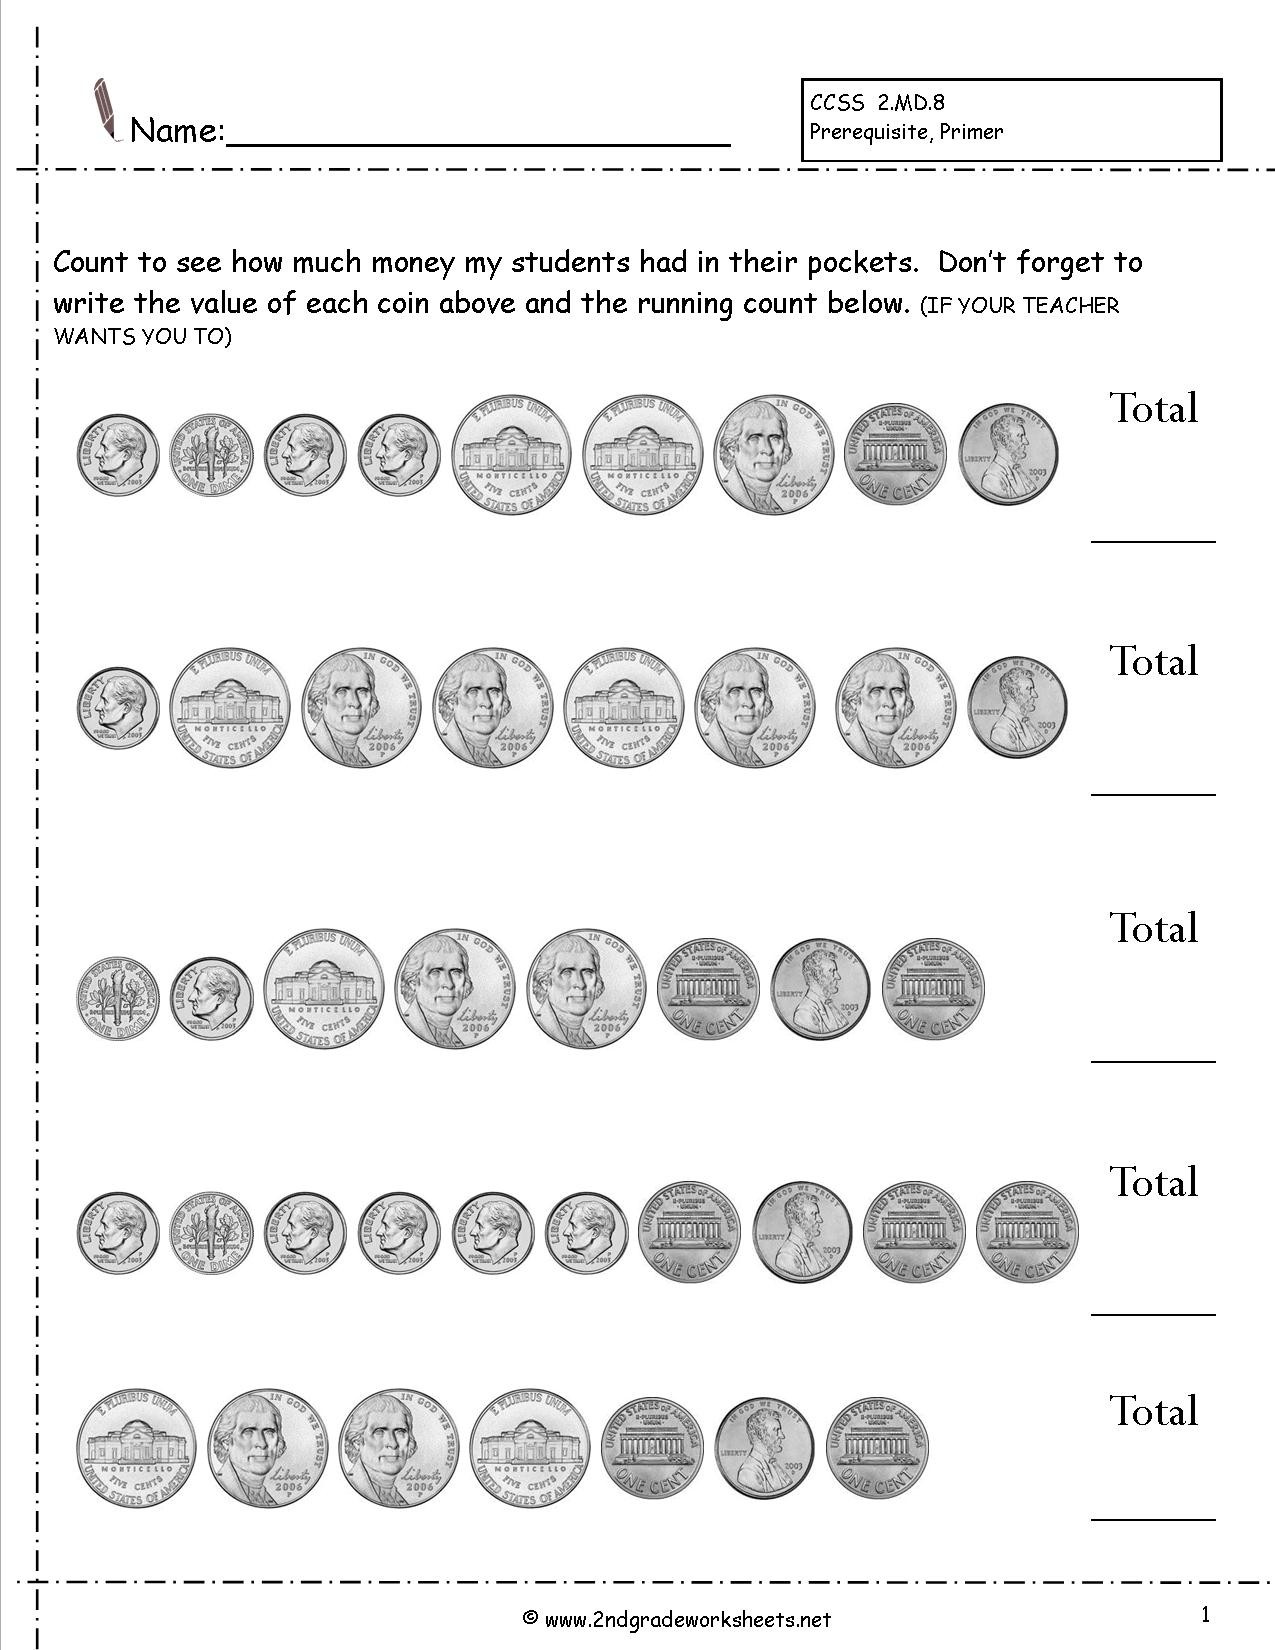 Counting Coins Worksheets 2nd Grade Counting Coins and Money Worksheets and Printouts